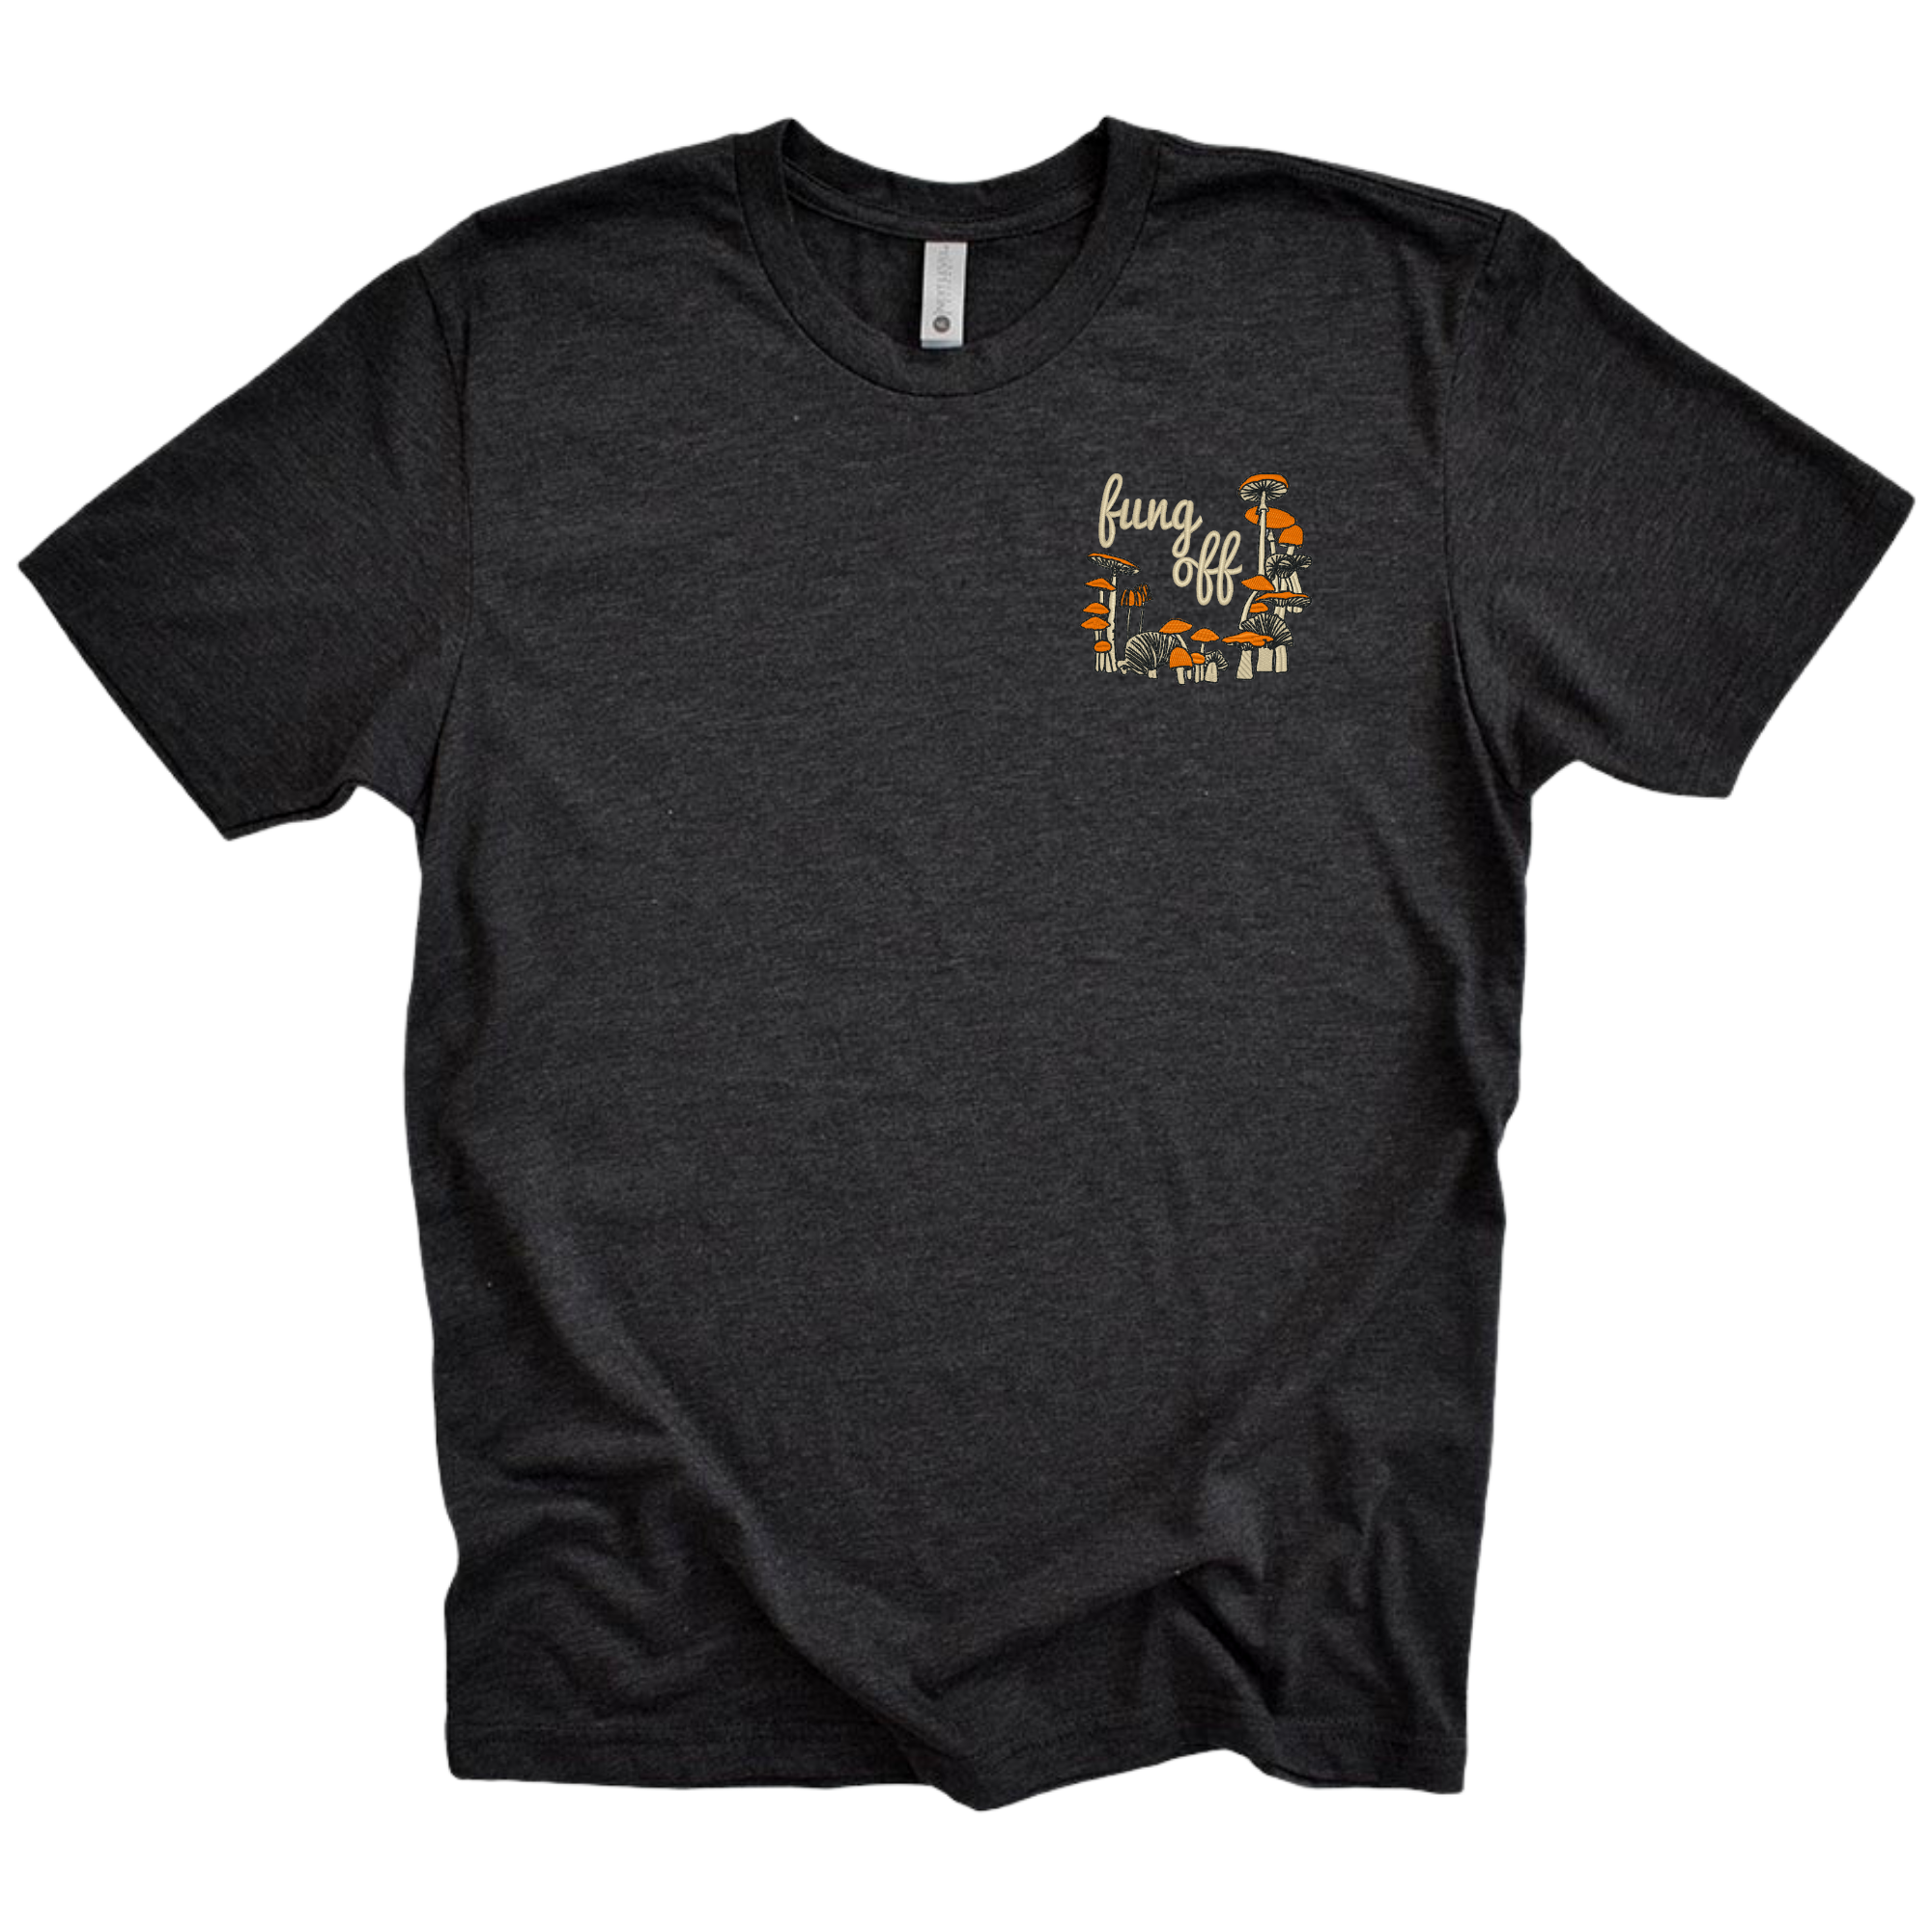 Fung Off Embroidered Black Tee Shirt Unisex